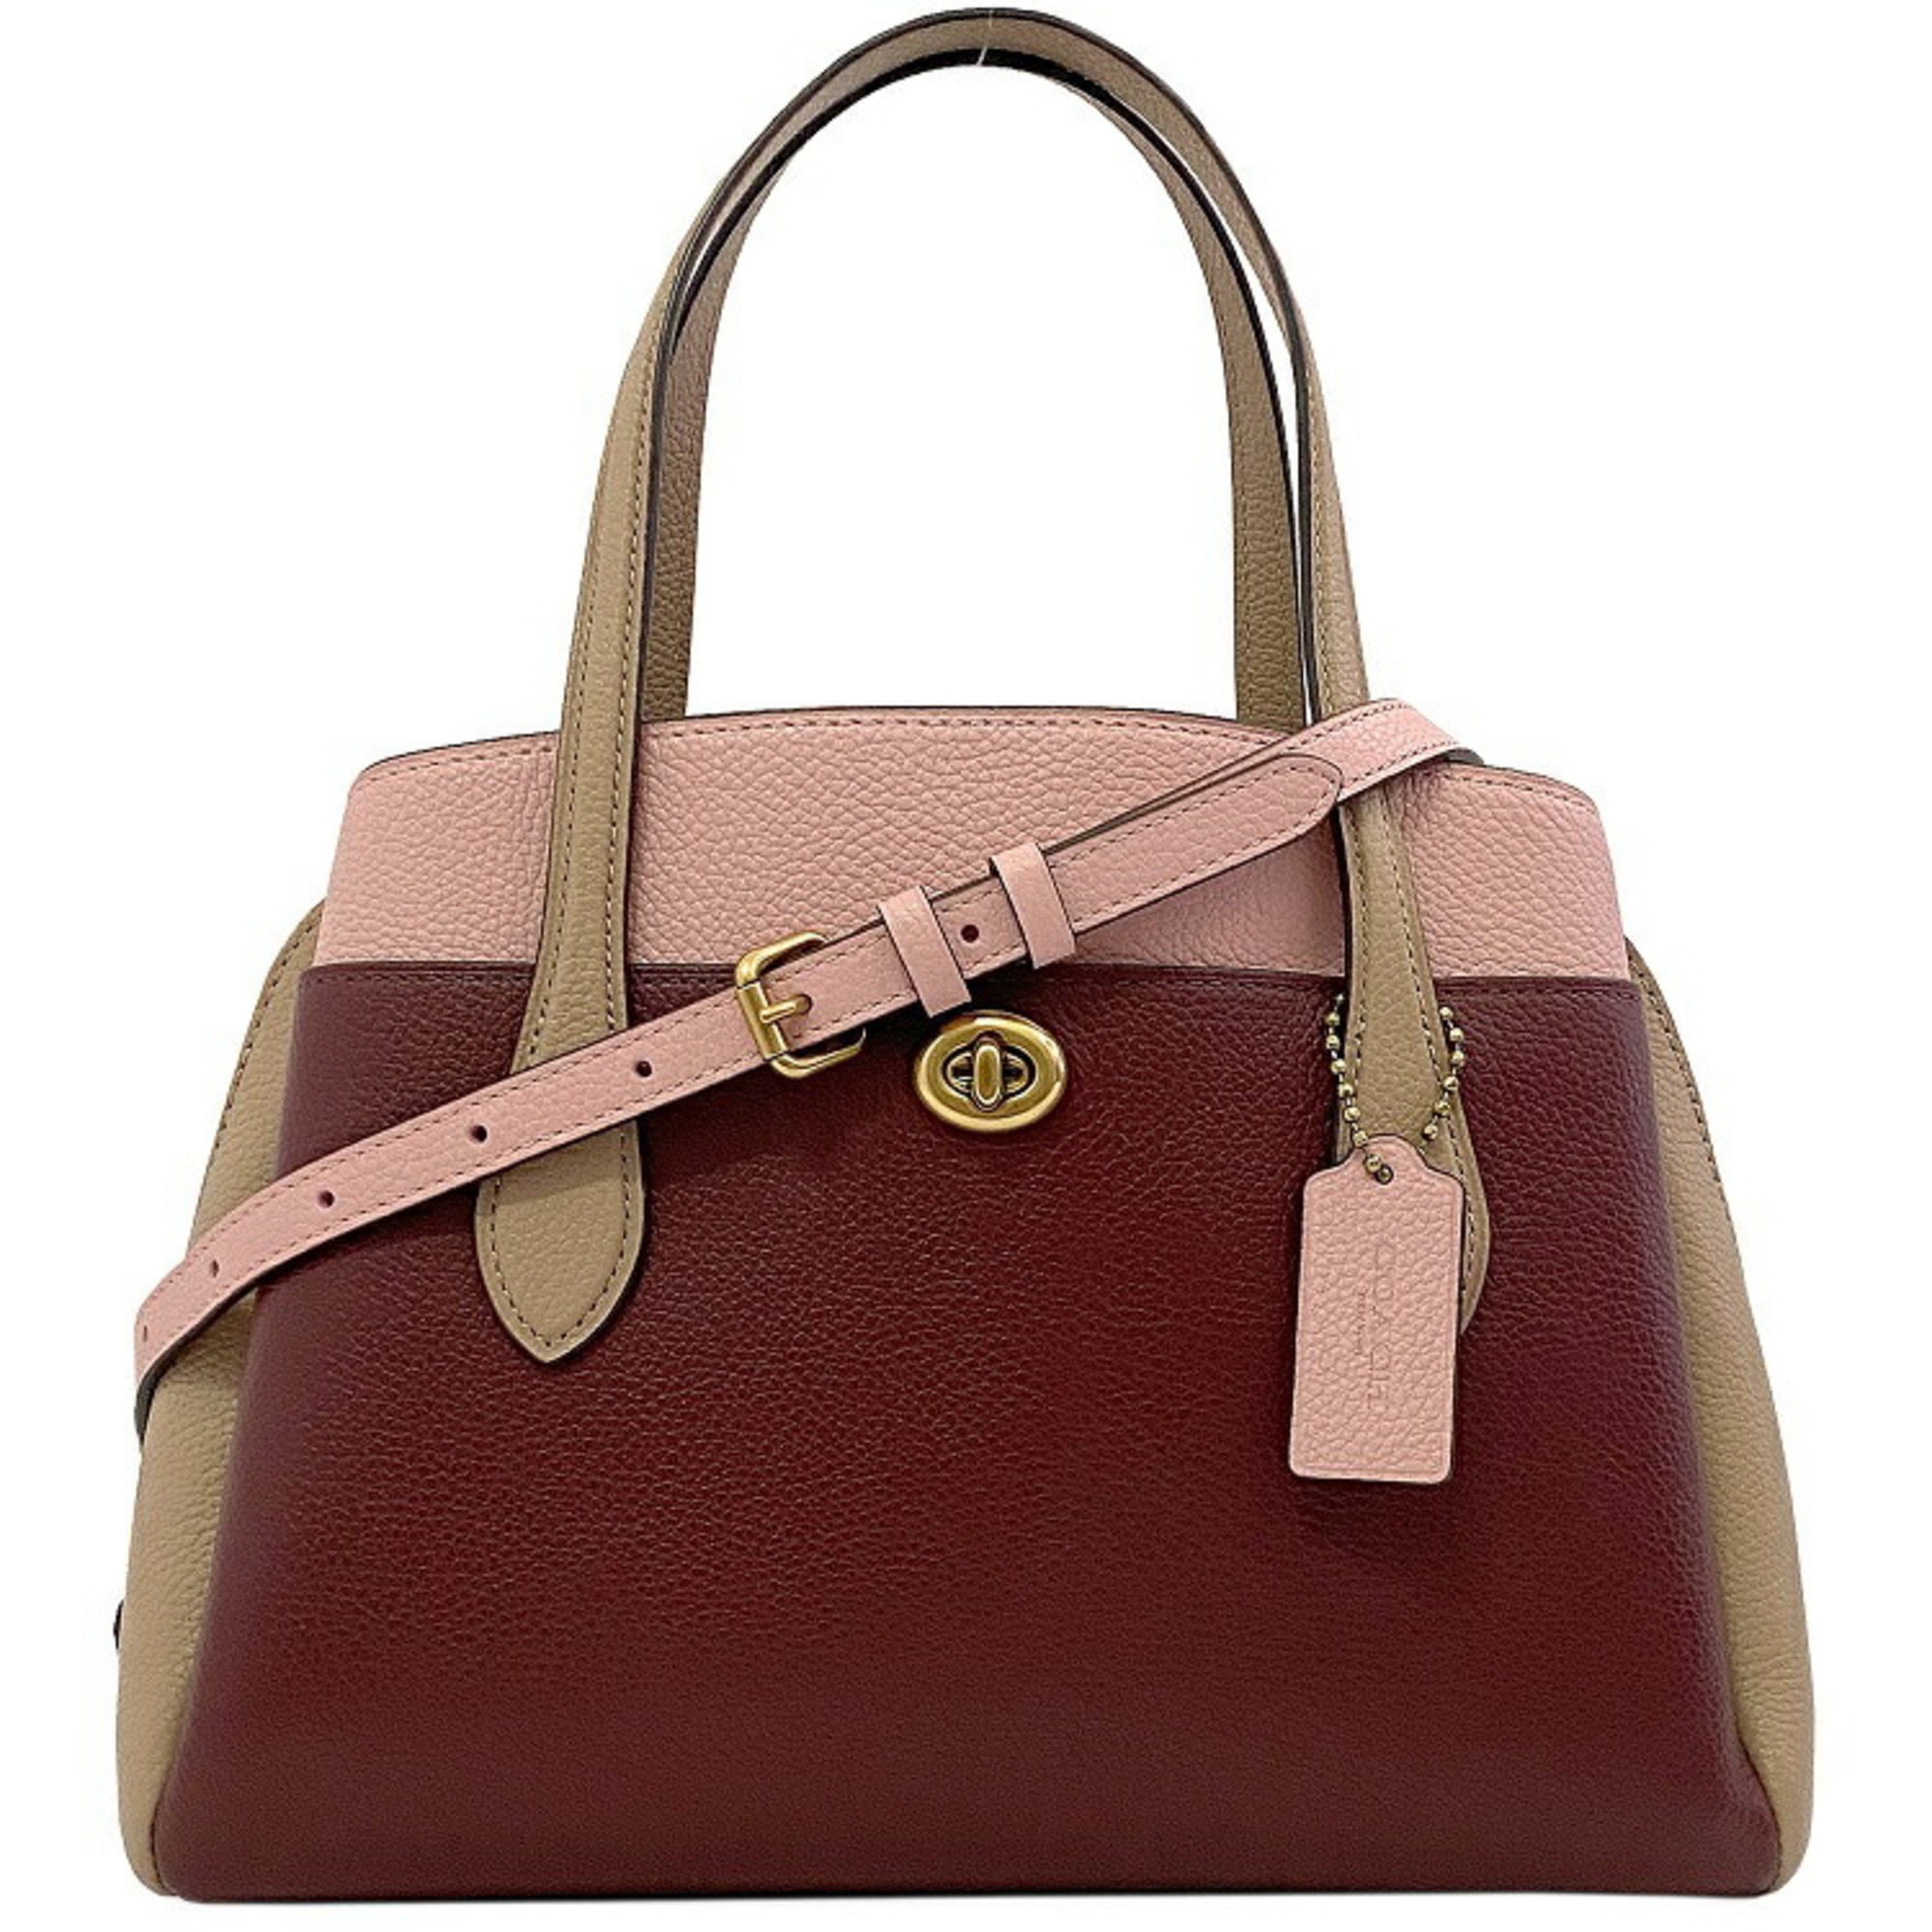 Authenticated Used Coach Bag Wine Red Pink Beige 5208 Leather COACH Hand  Shoulder Tote Top Handle Turn Lock Ladies Color Scheme 